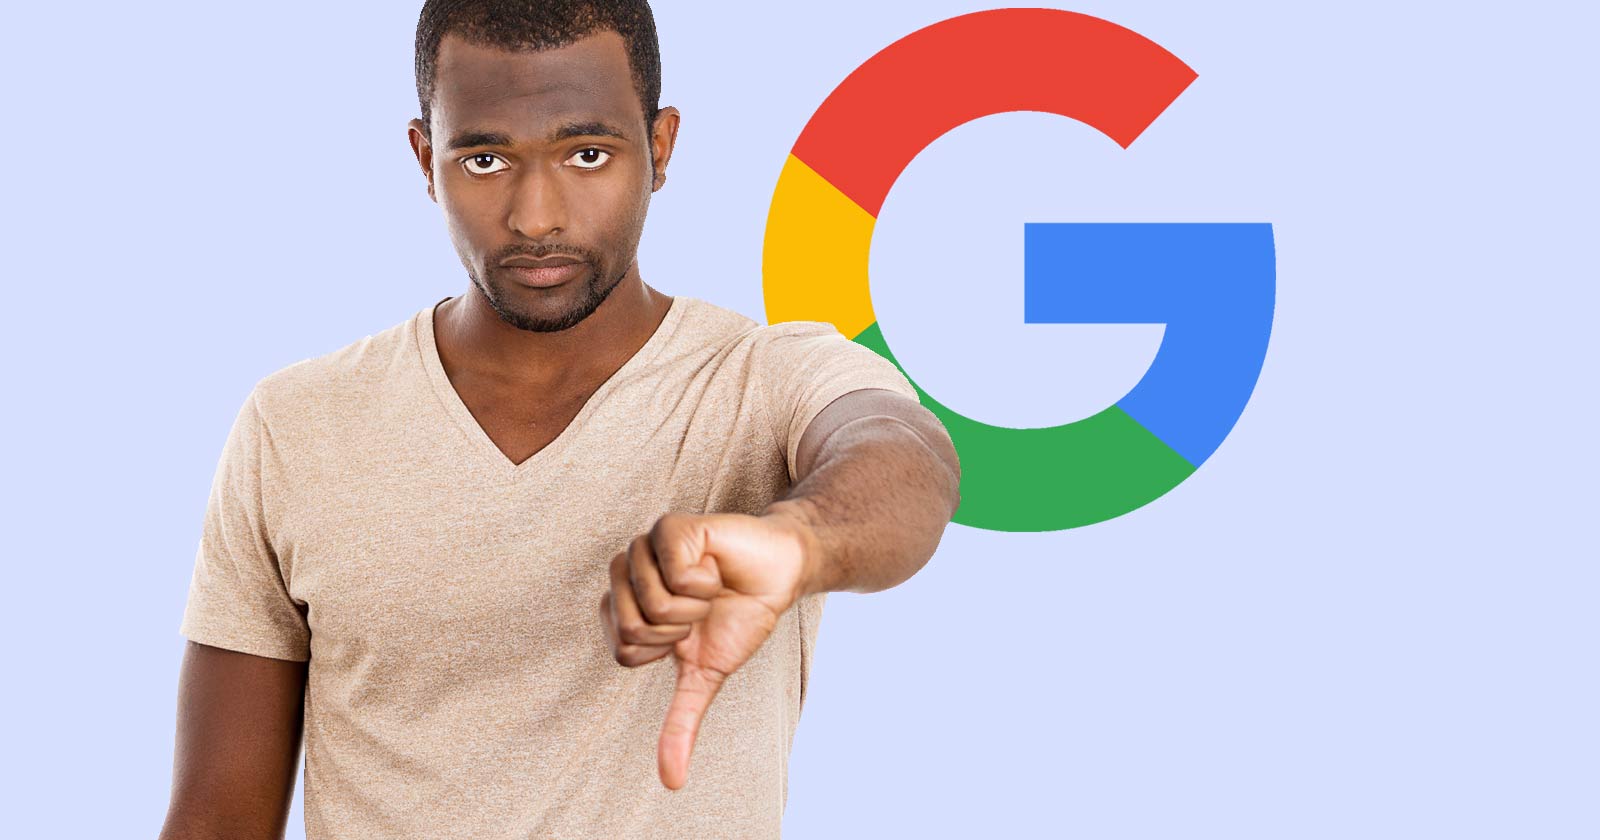 Google logo behind a young man making a thumbs down gesture